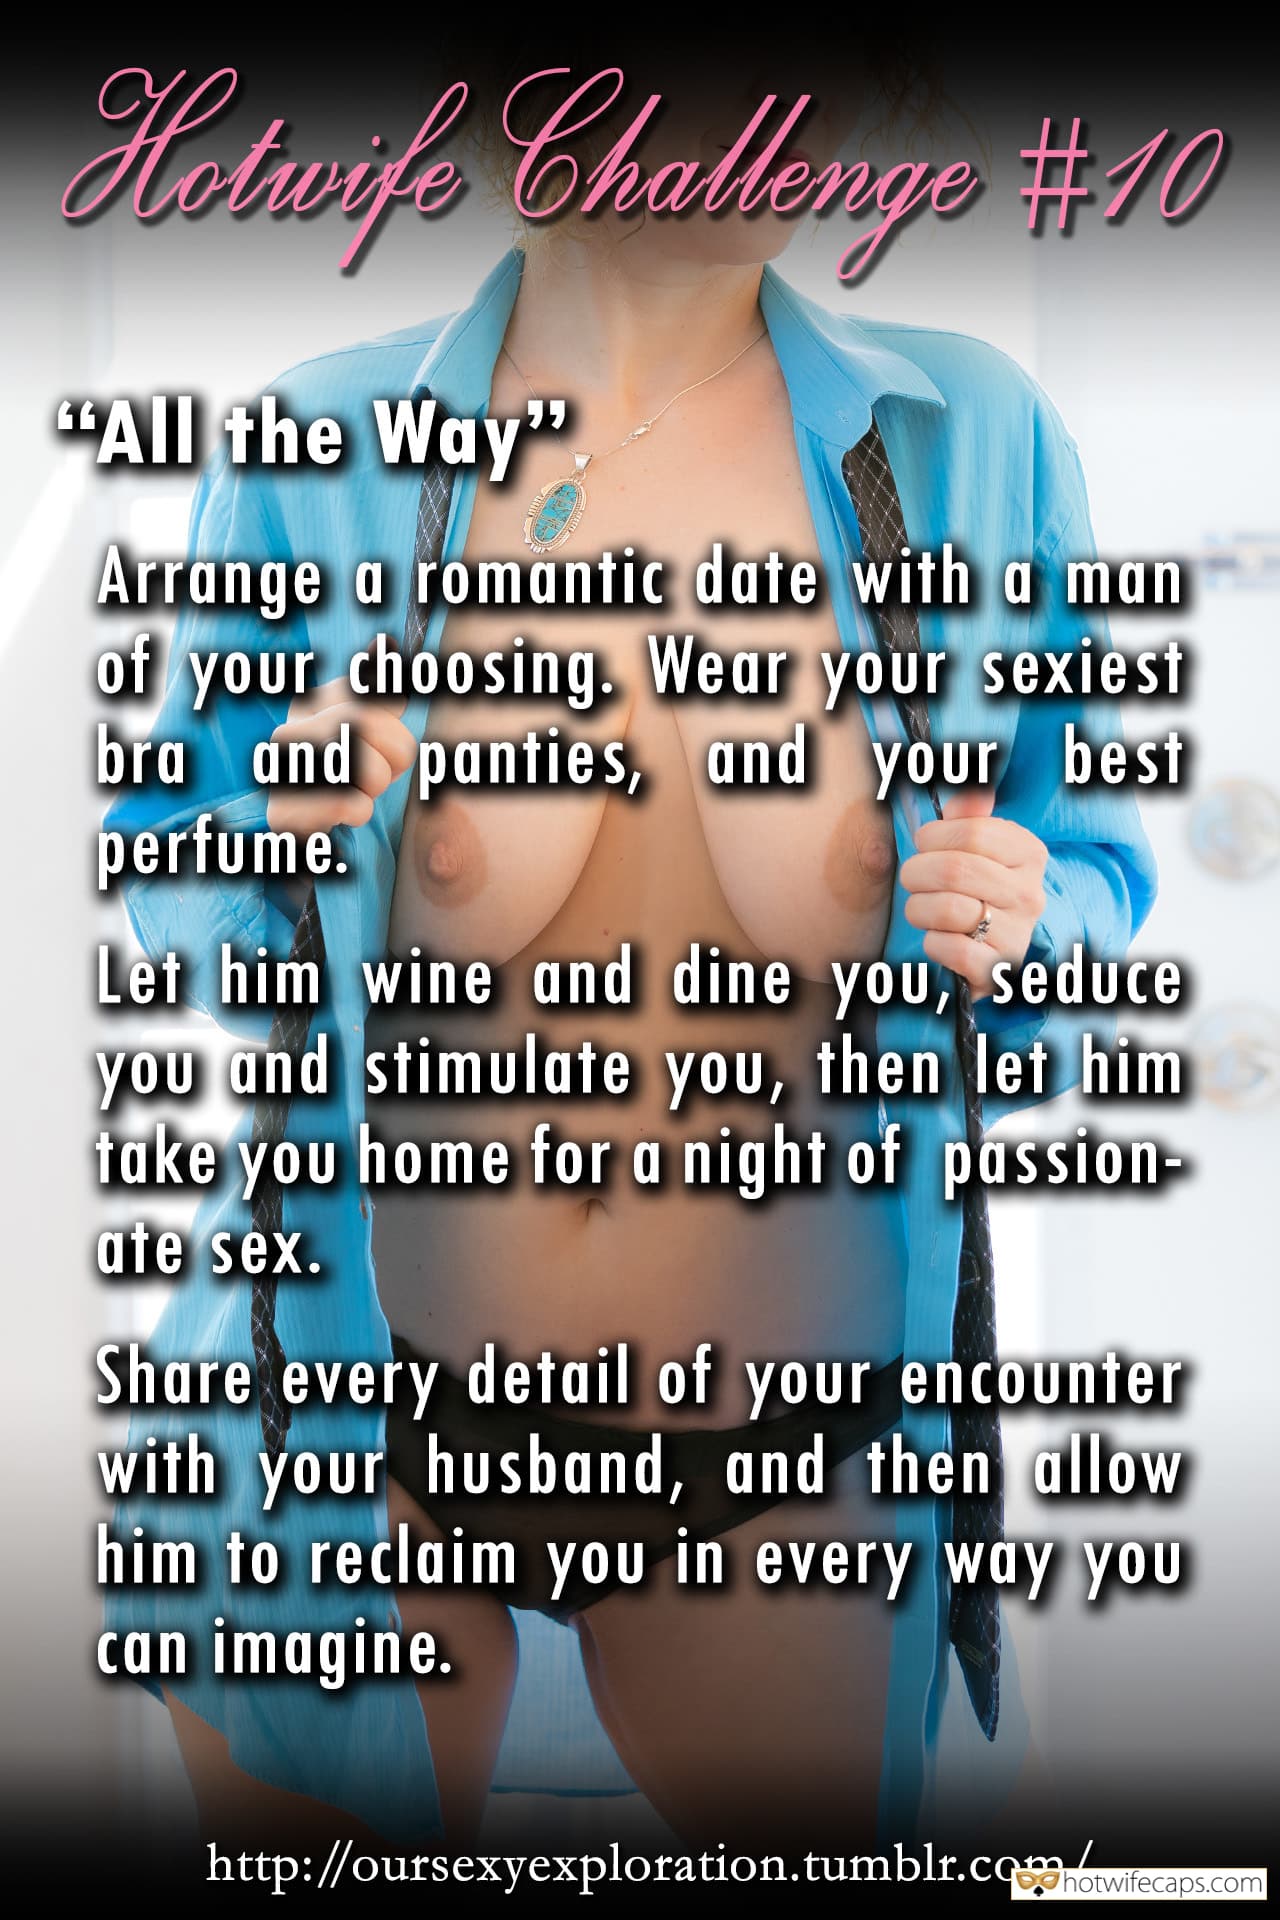 My Favorite hotwife caption: Hotwifs Challenys #40 #10 “All the Way” Arrange a romantic date with a man of your choosing. Wear your sexiest bra and panties, and your best perfume. Let him wine and dine you, seduce you and stimulate you, then let...